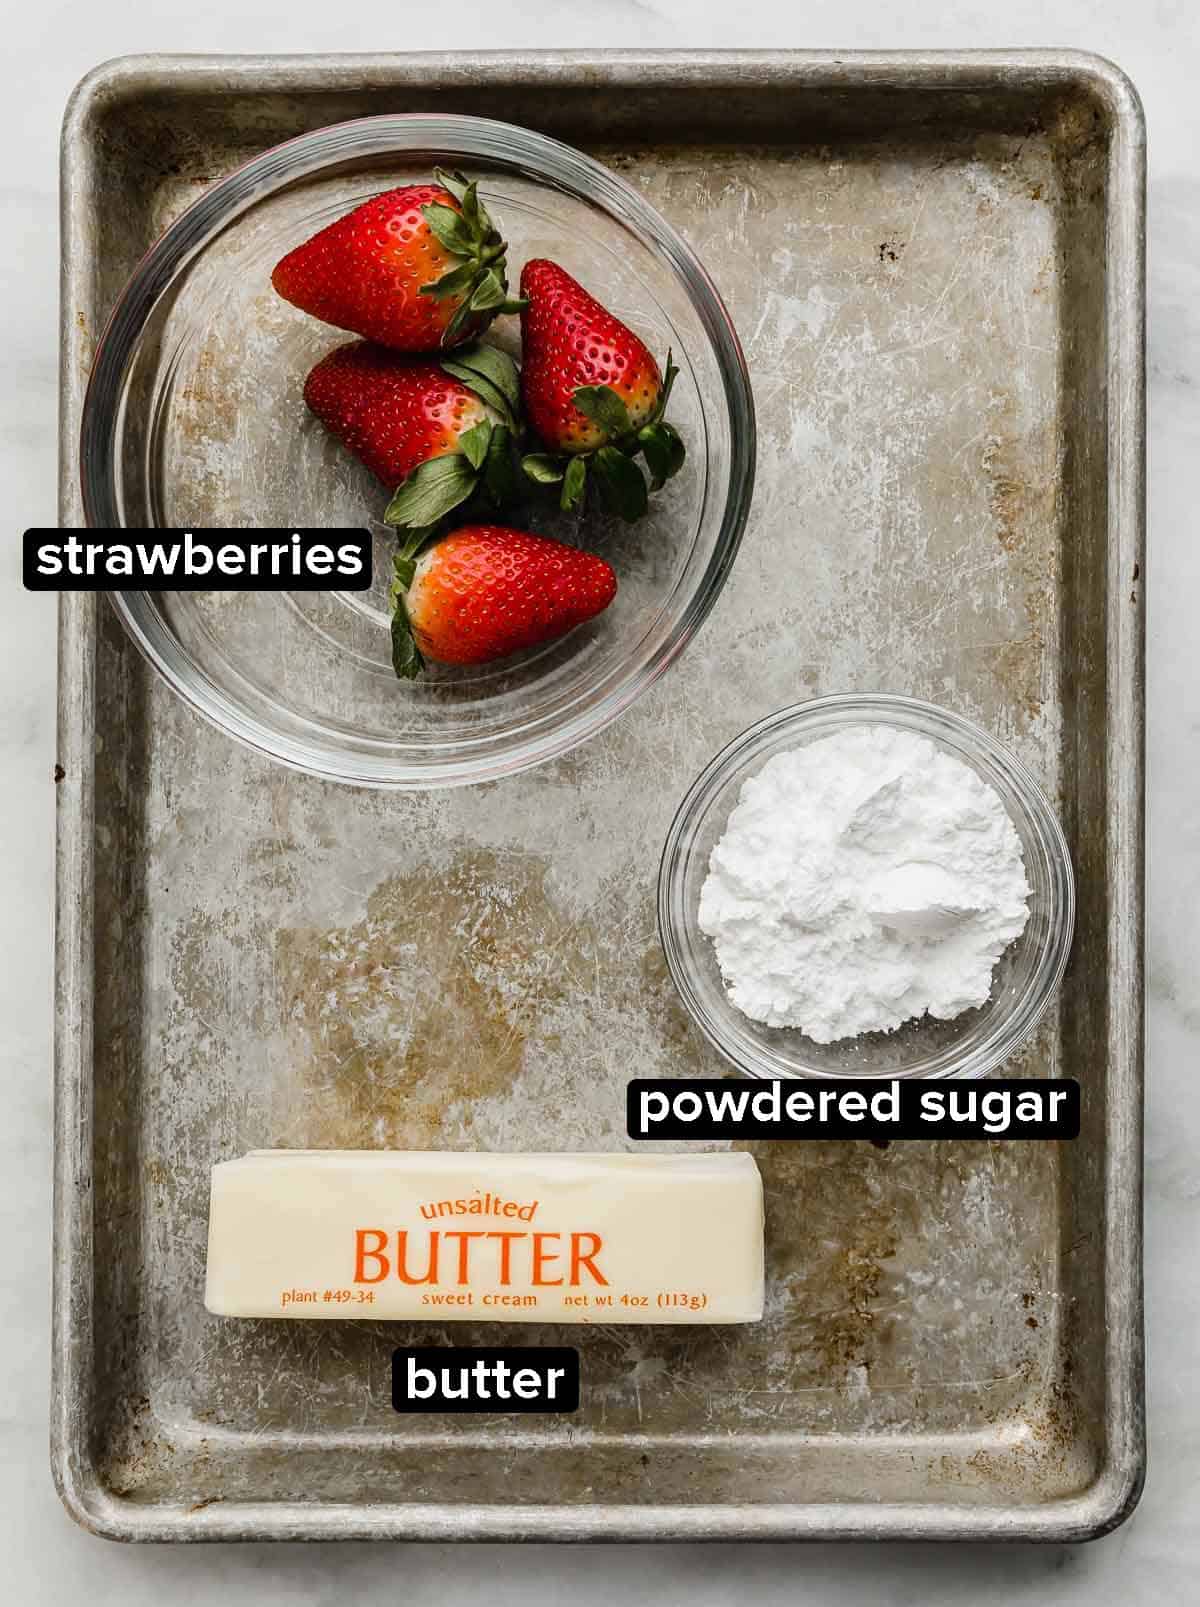 Strawberry Butter ingredients portioned into glass bowls on a metal baking sheet: fresh strawberries, powdered sugar, and a cube of unsalted butter.